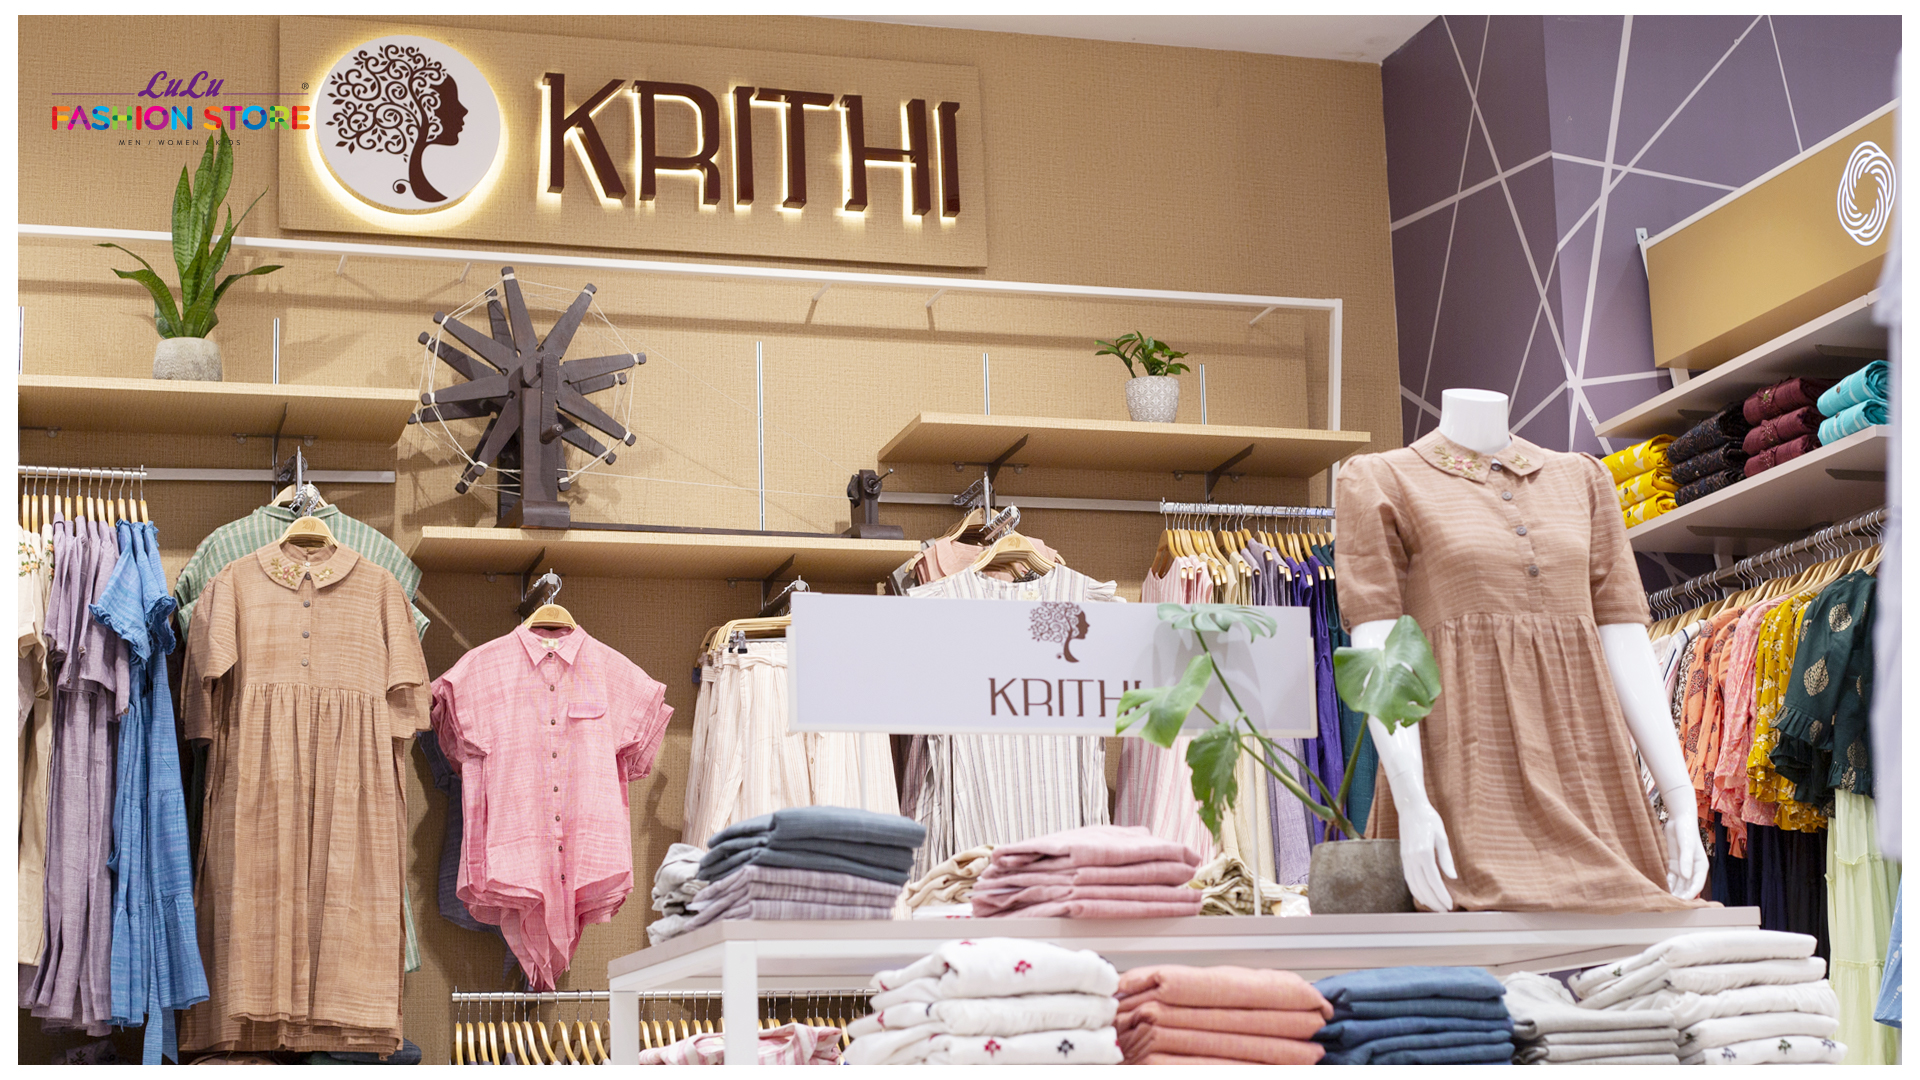 LuLu Fashion Store on X: Explore the wide variety of Handloom collections  of Krithi from LuLu Fashion Store. Handloom weaving forms an integral part  of the rich culture and tradition of India. @